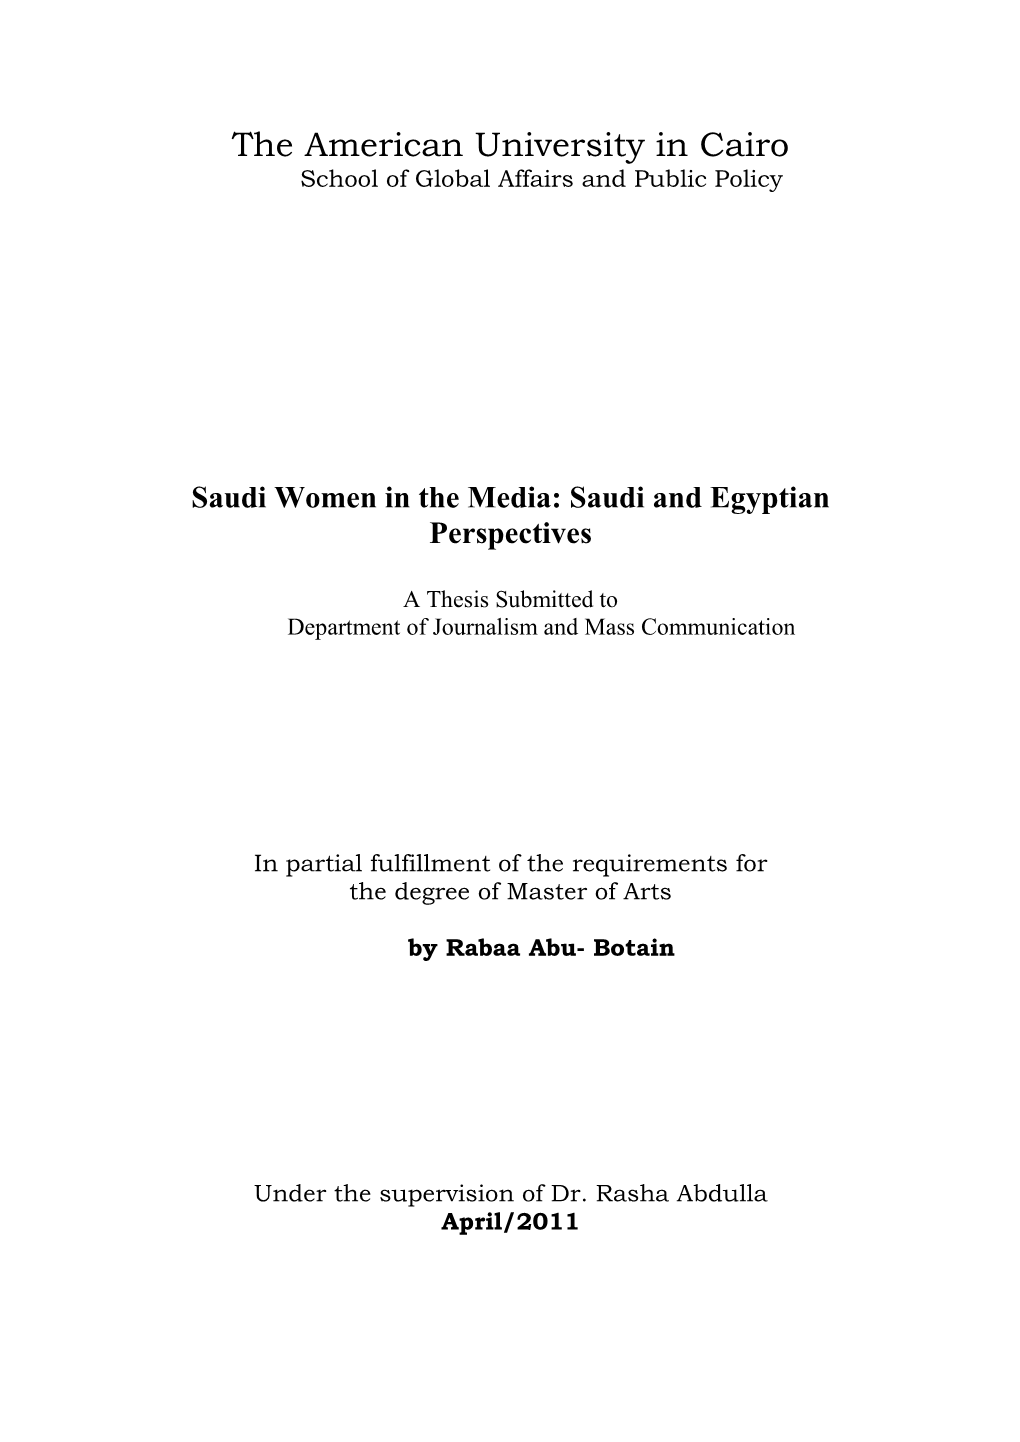 Saudi Women in the Media: Saudi and Egyptian Perspectives